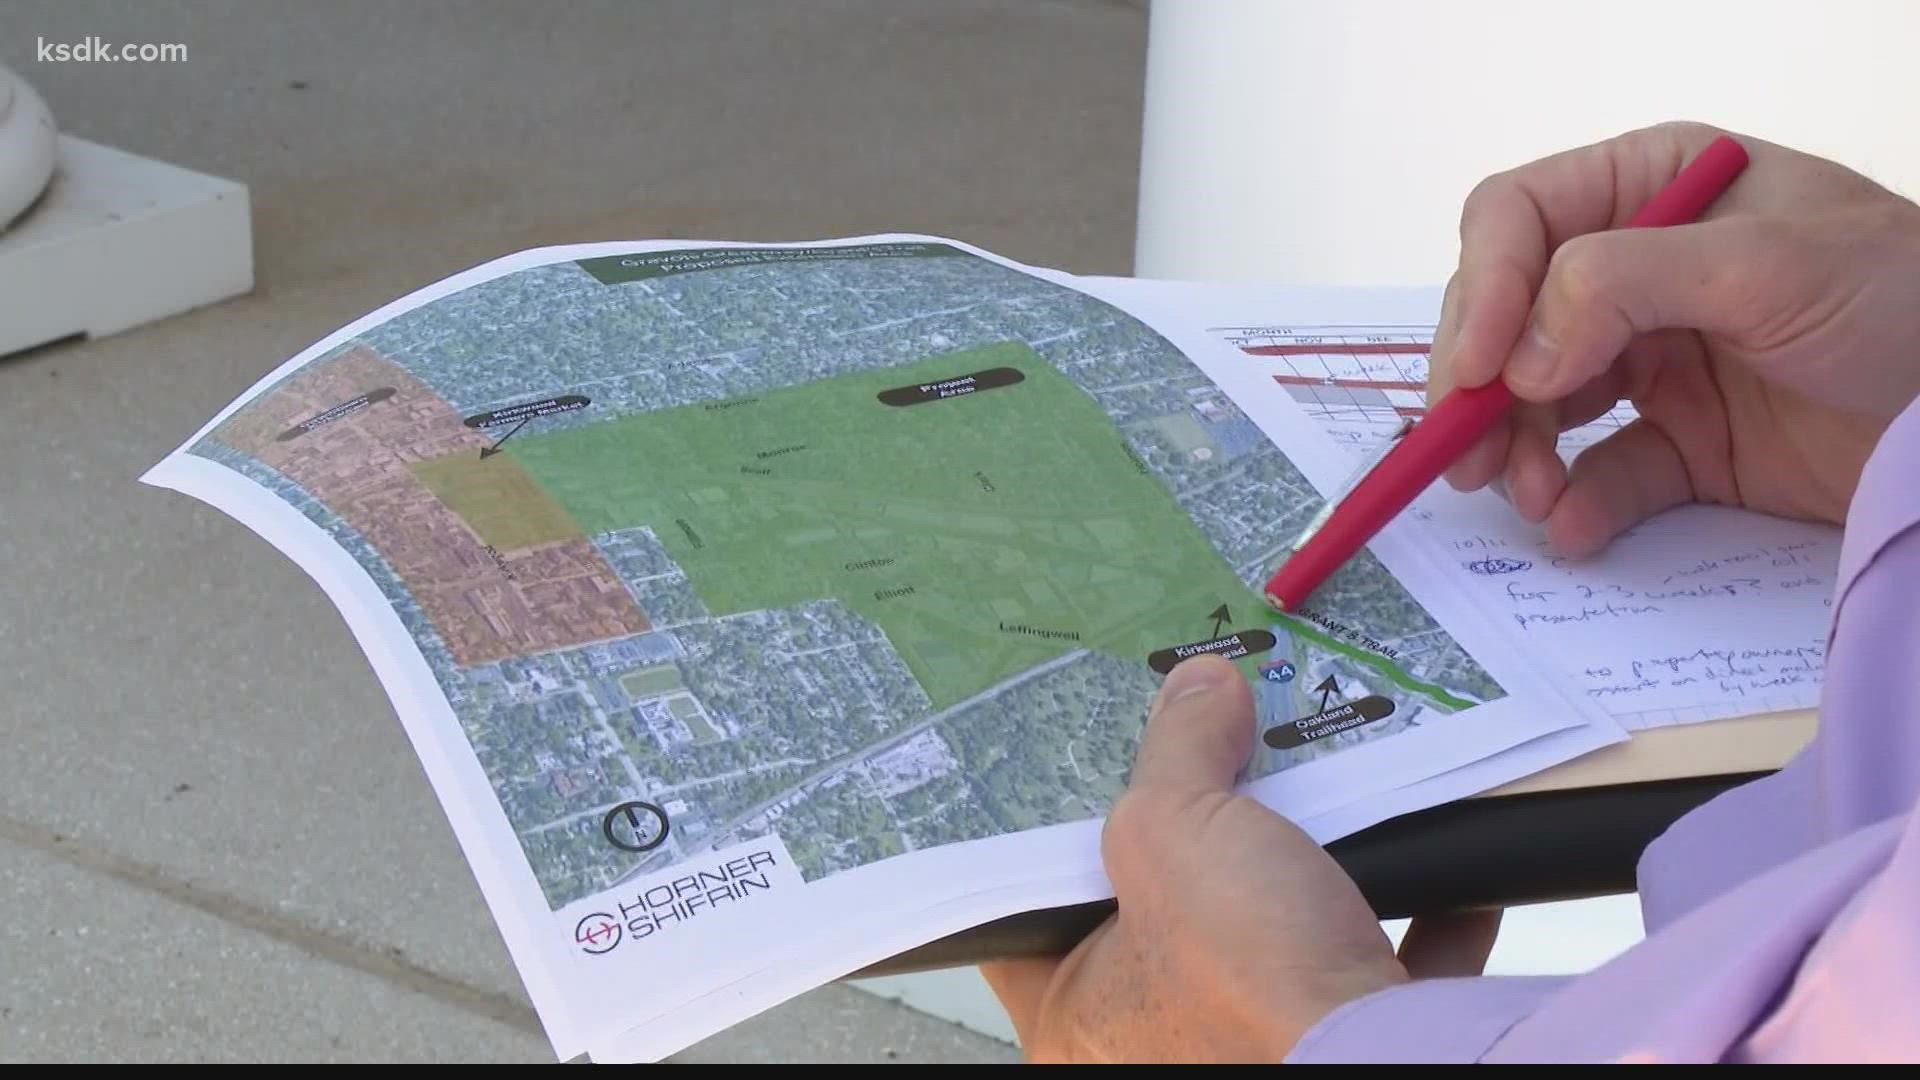 City leaders held a virtual public meeting Tuesday to talk about the potential expansion into downtown Kirkwood.